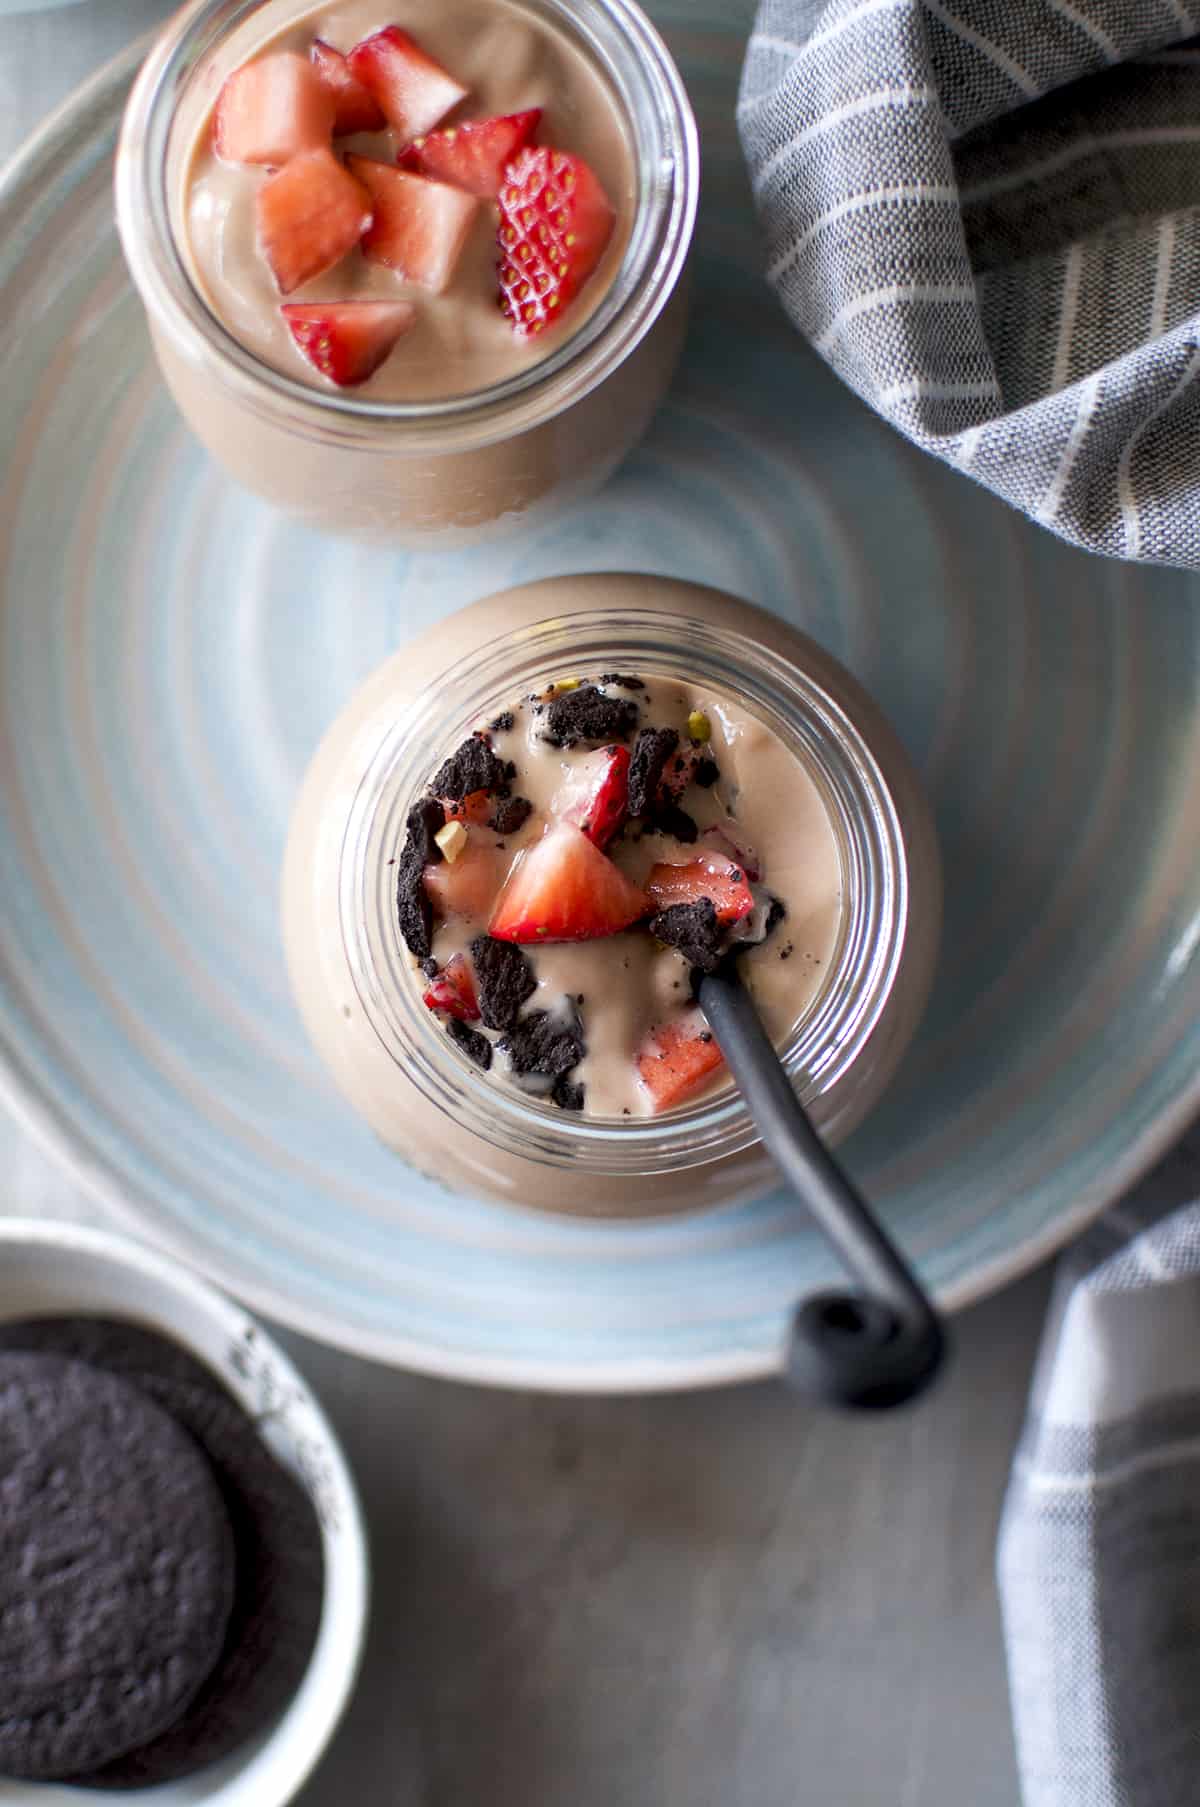 Chocolate custard topped with chopped berries, crushed cookies and nuts in a glass bottle with a spoon inside